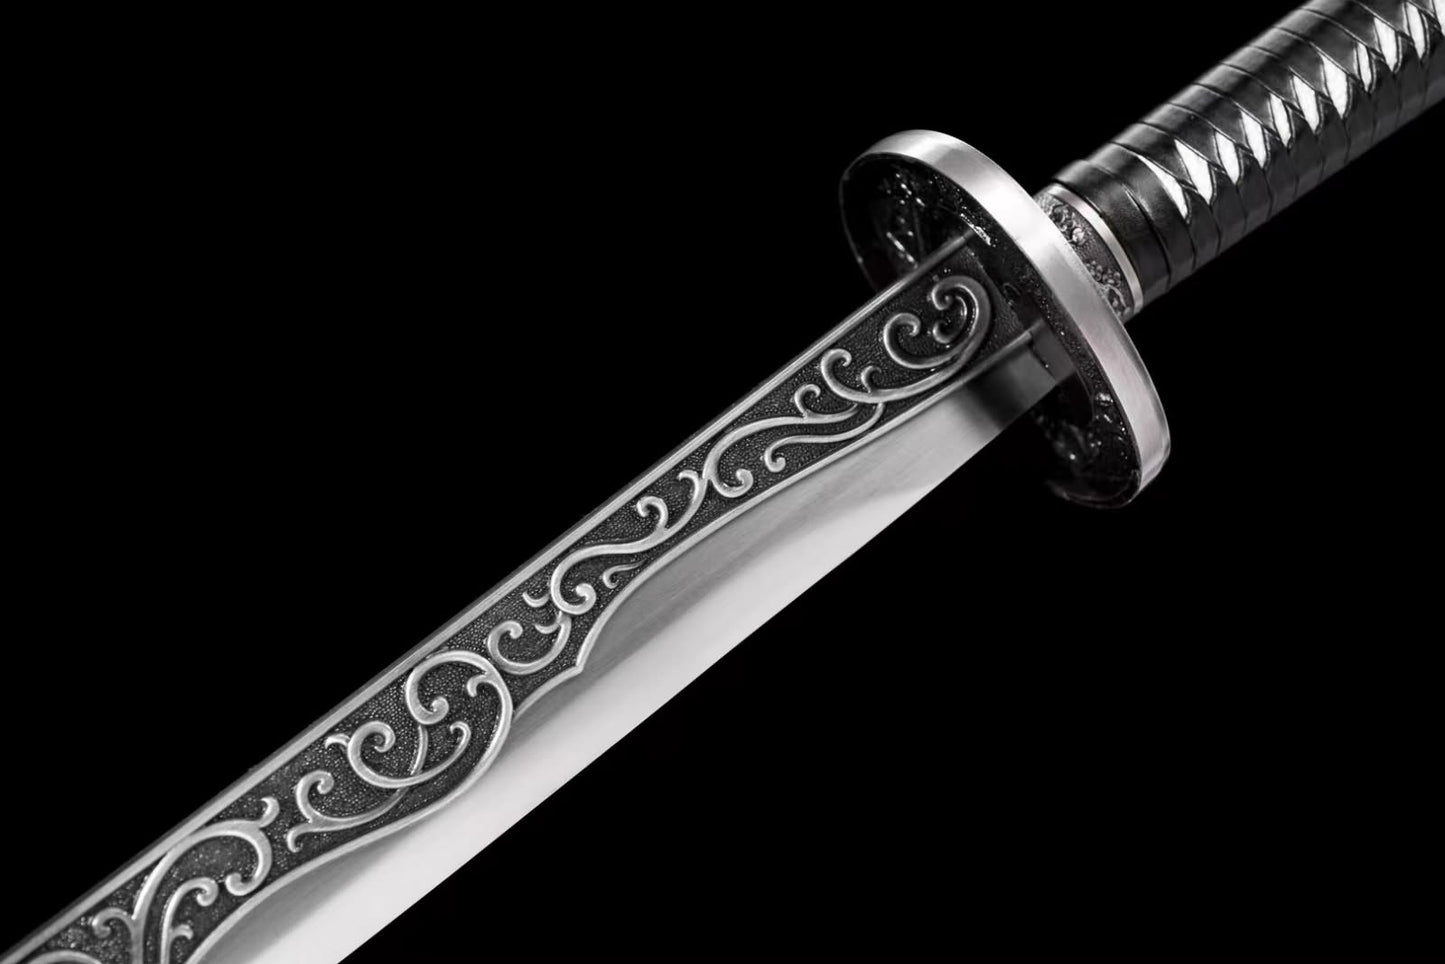 Authentic Chinese Plum Blossom Qing Dao Sword-High Carbon Steel Blade